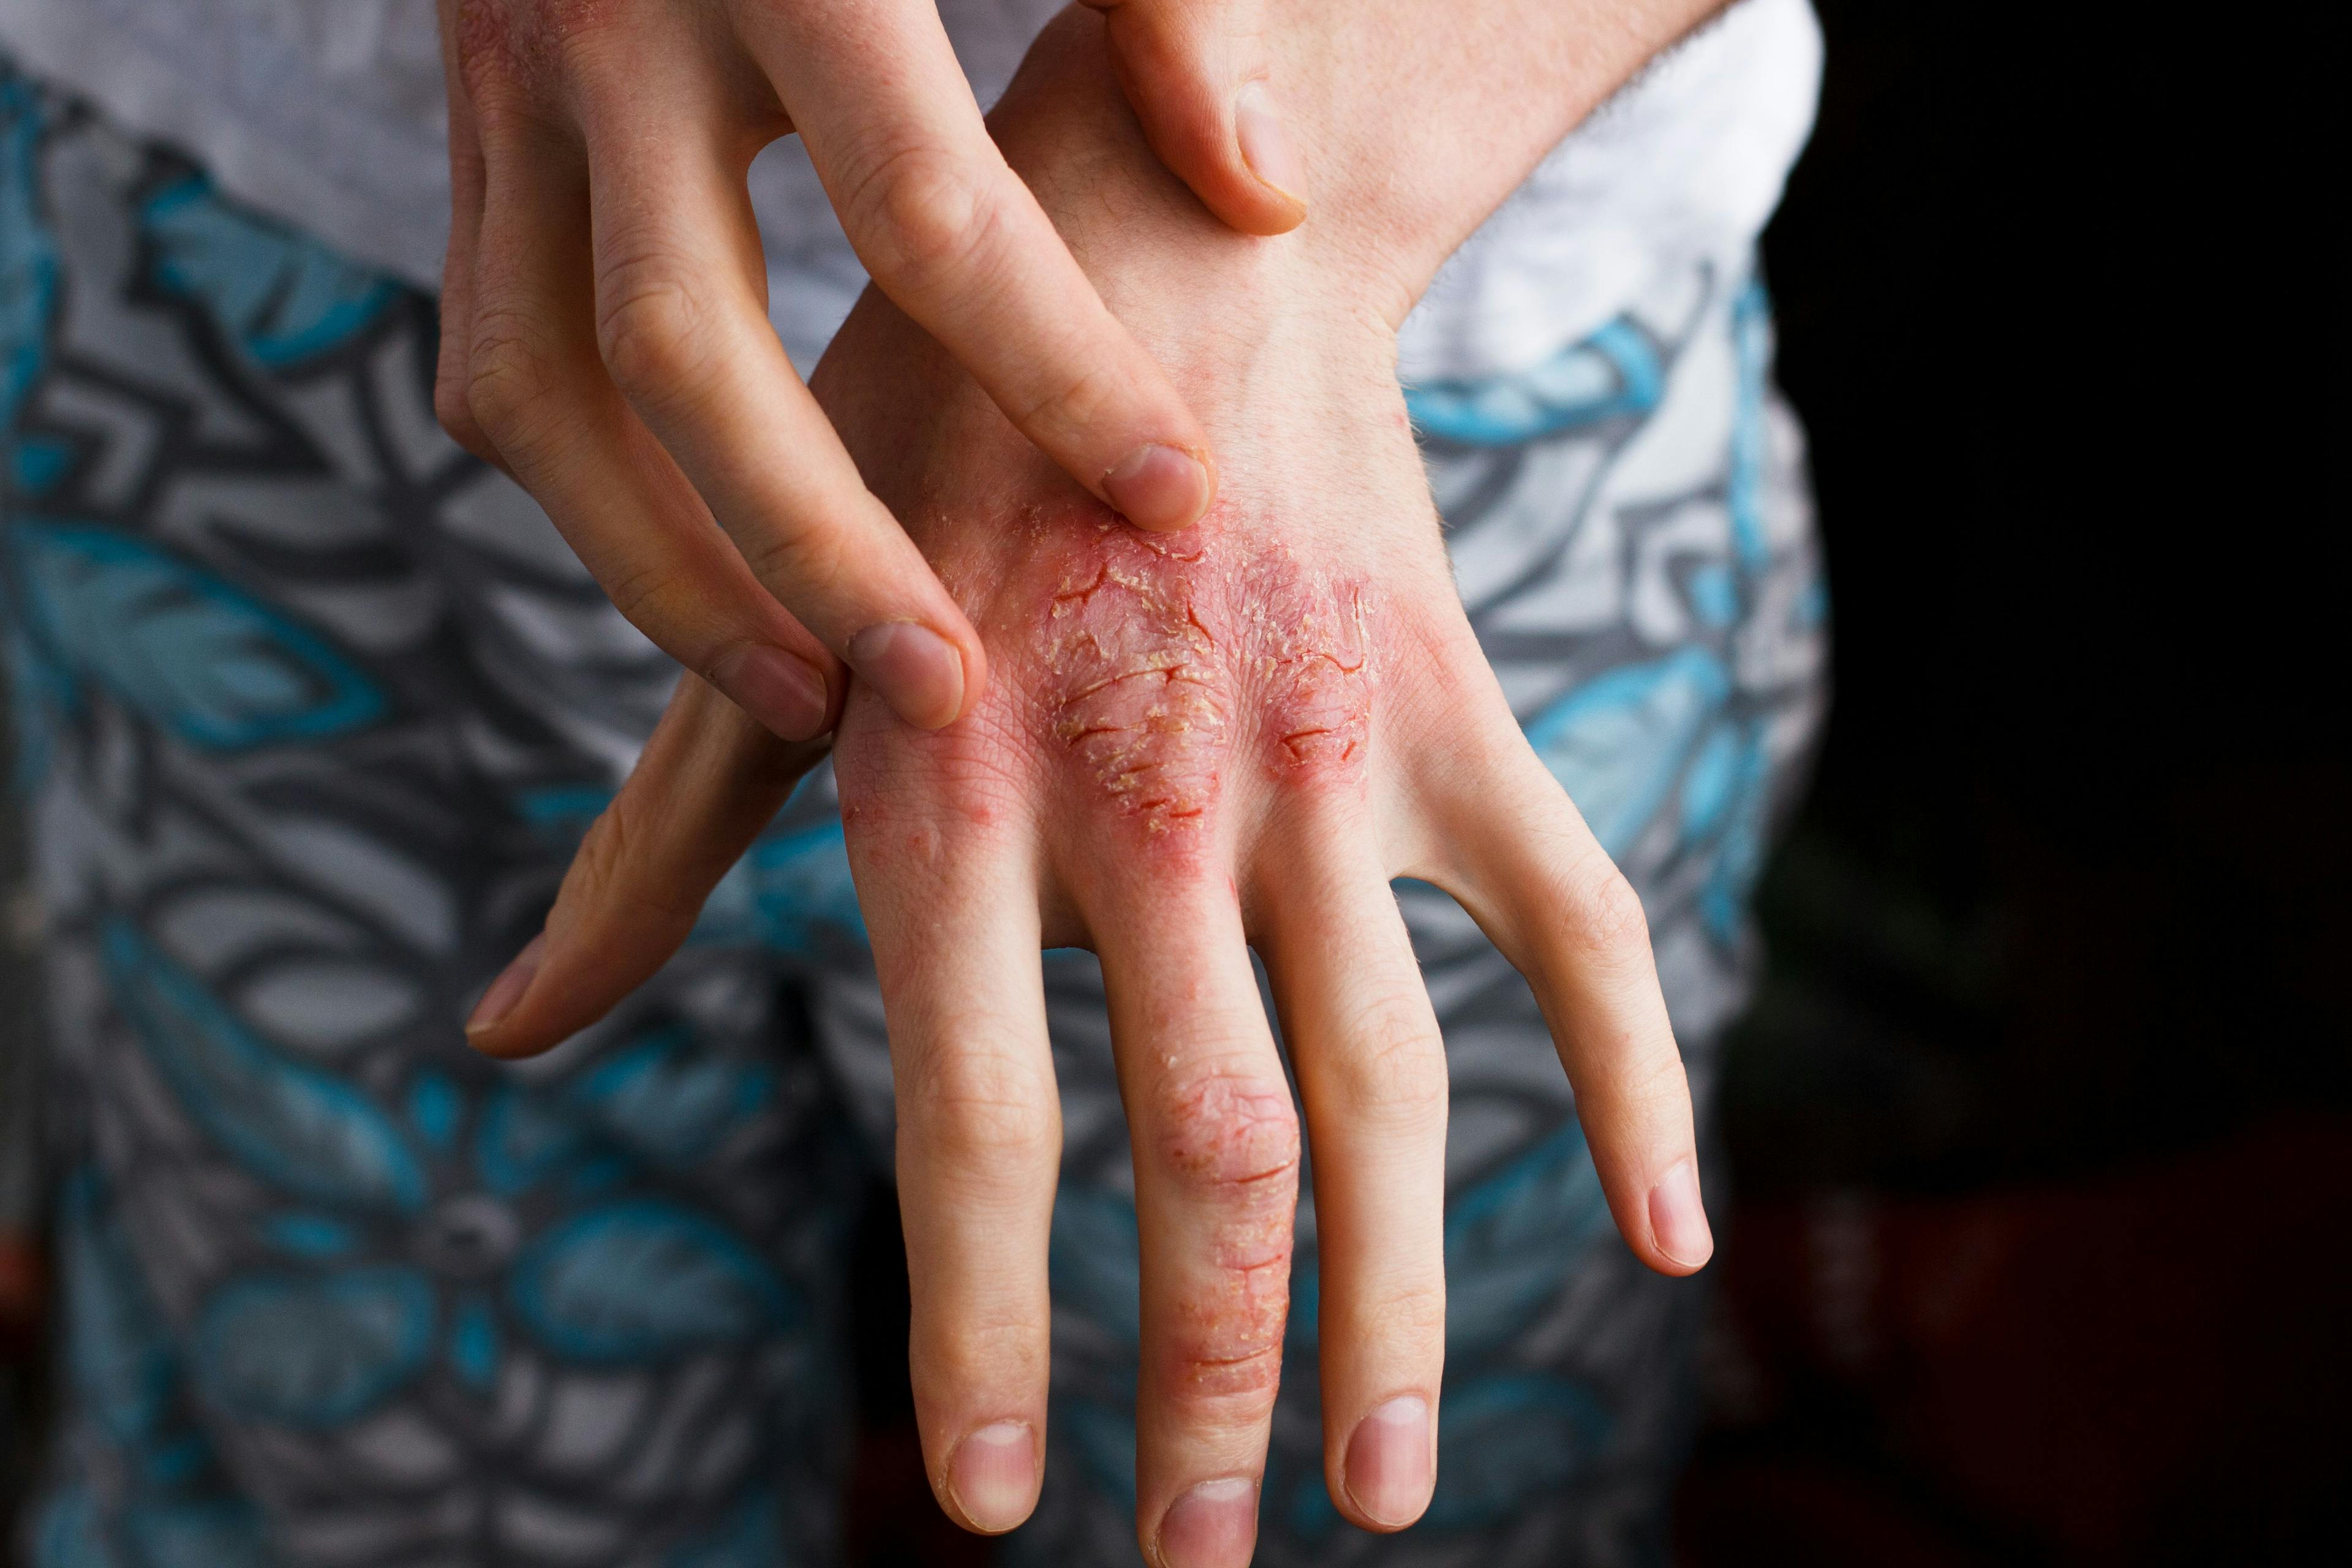 International Experts Reach Consensus on Uniform Dosing of Methotrexate for Psoriasis